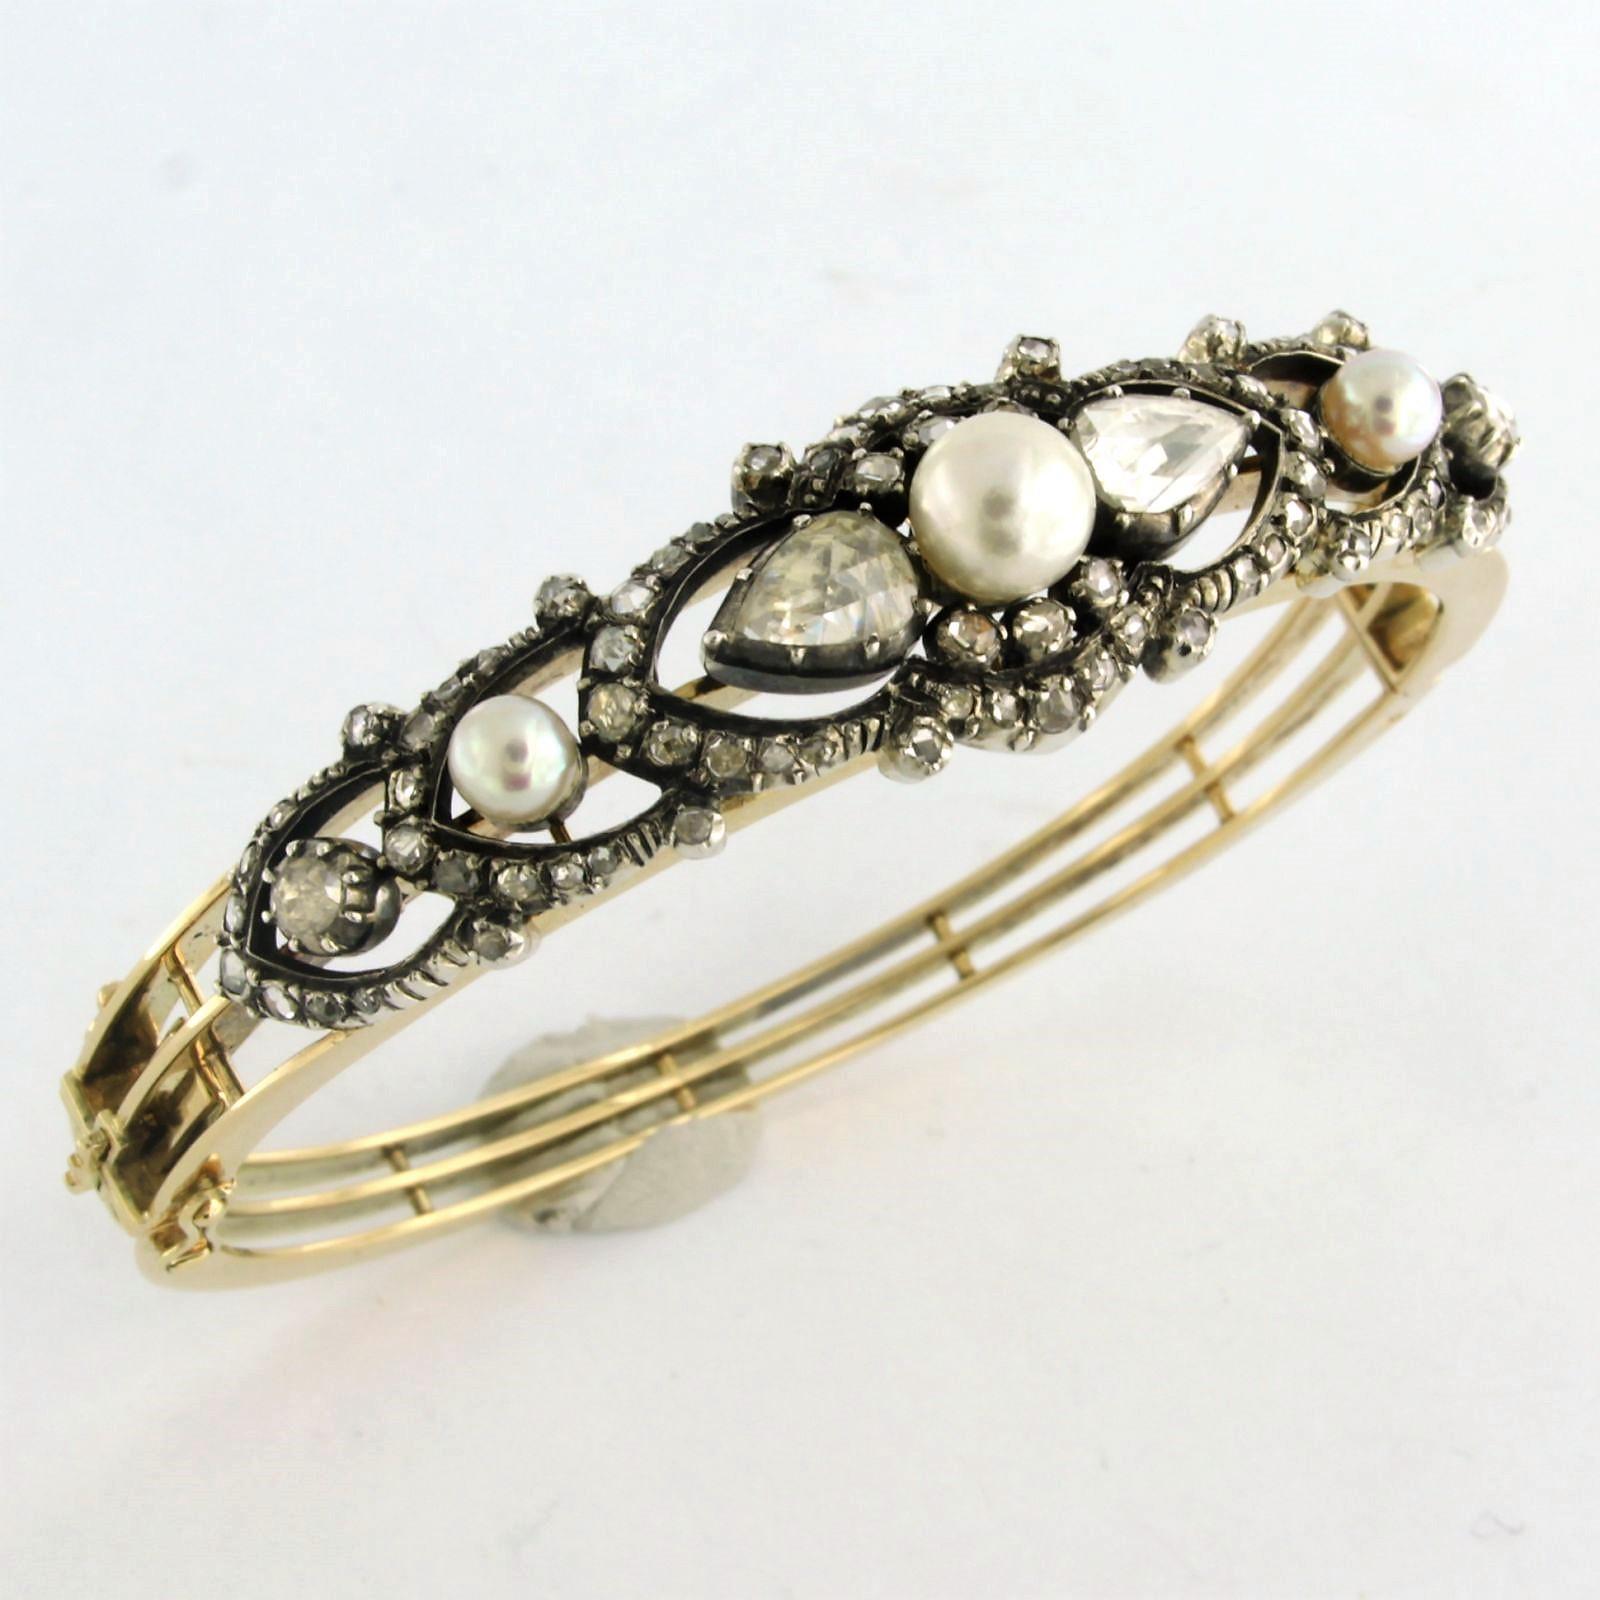 Clamper Bracelet set with pearls and diamonds 14k yellow gold and silver For Sale 3